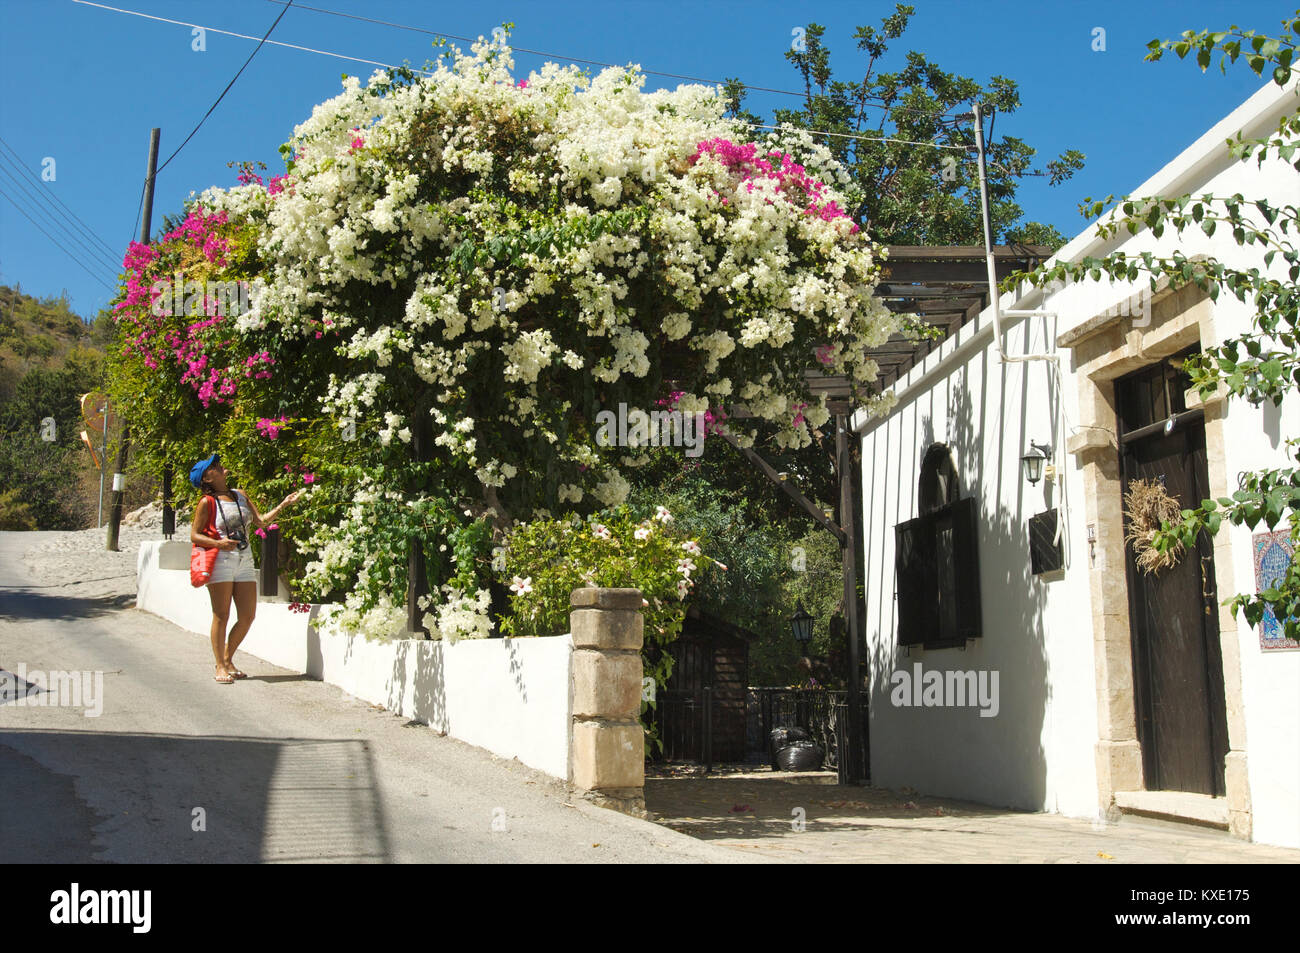 Woman walking down a street in Karmi and enjoying the colorful flowers in the gardens, Cyprus Stock Photo